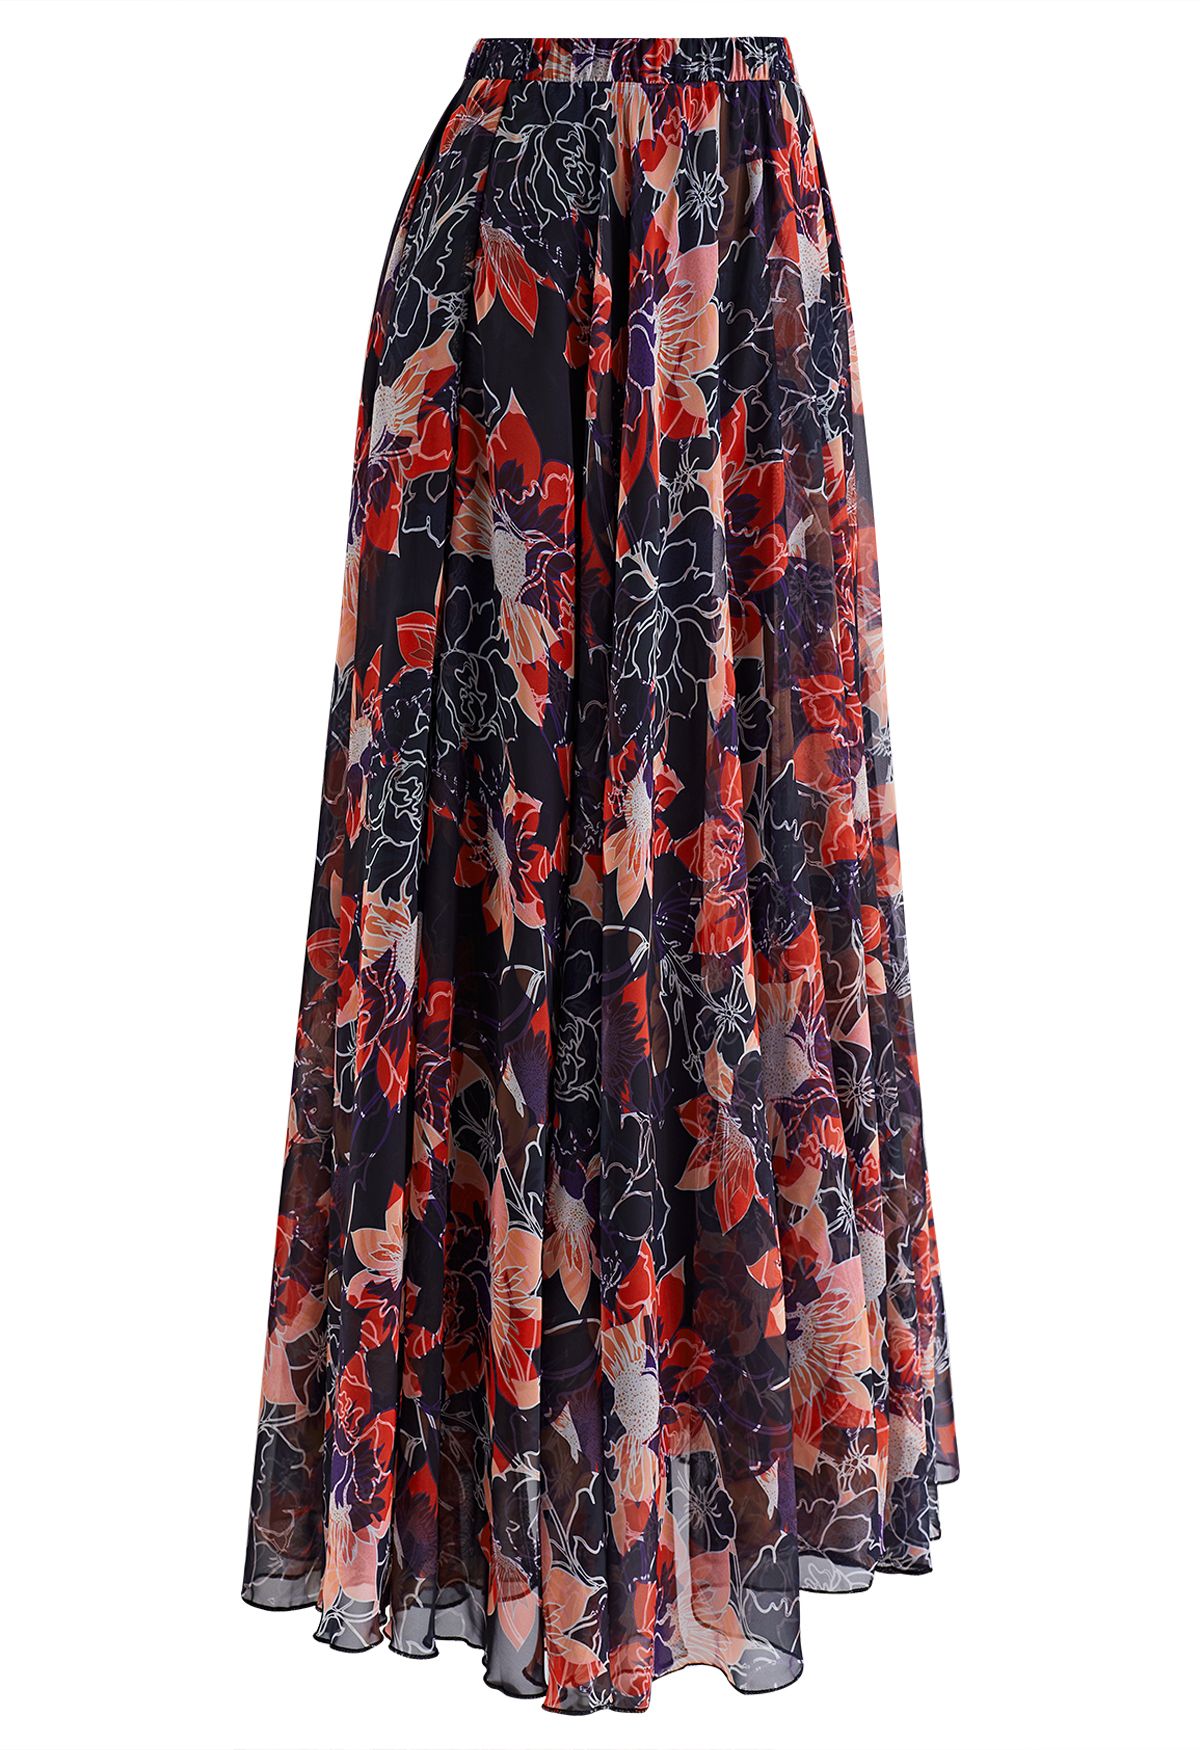 Fully Bloomed Red Floral Chiffon Maxi Skirt